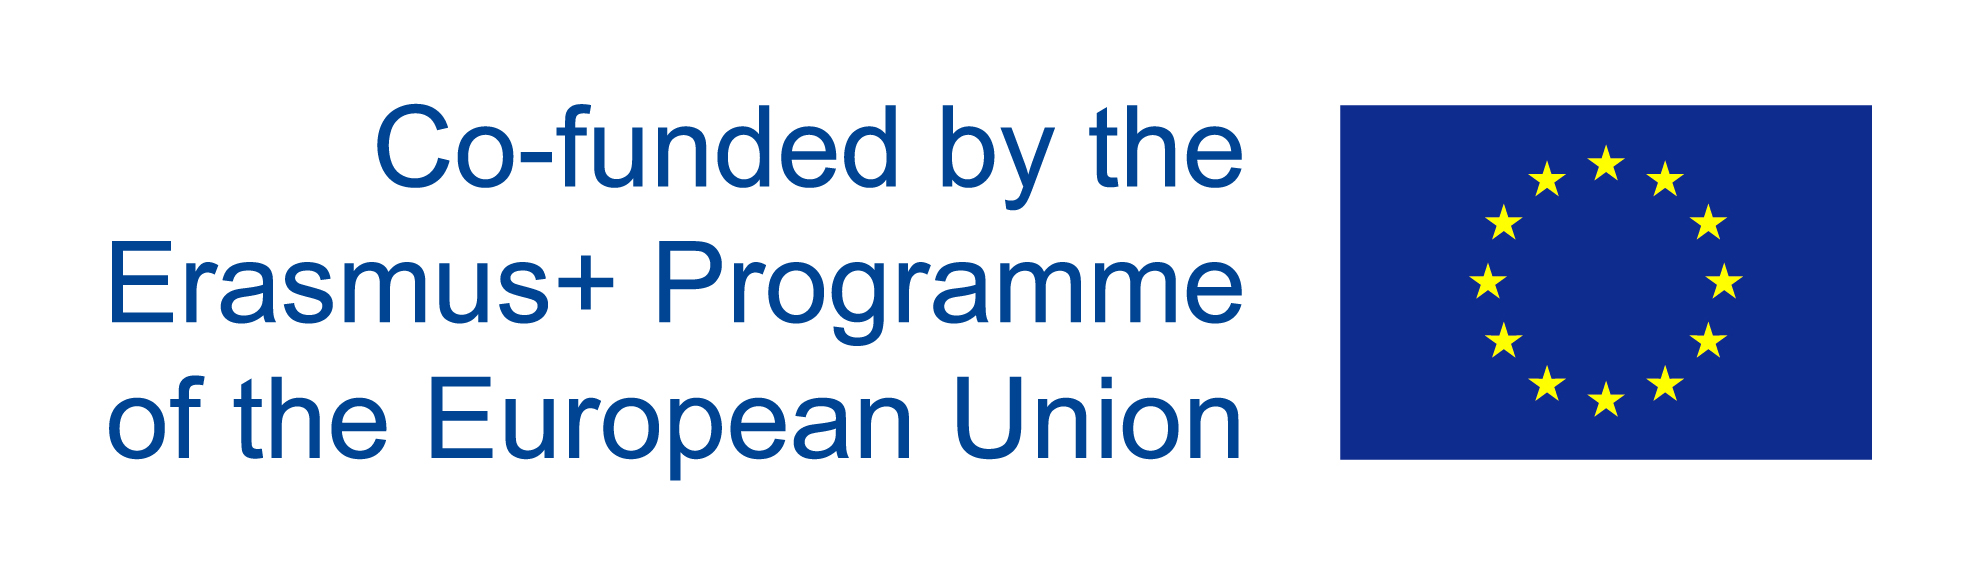 The symbol for the European Union next to the words "Co-funded by the Erasmus+ Programme of the European Union"